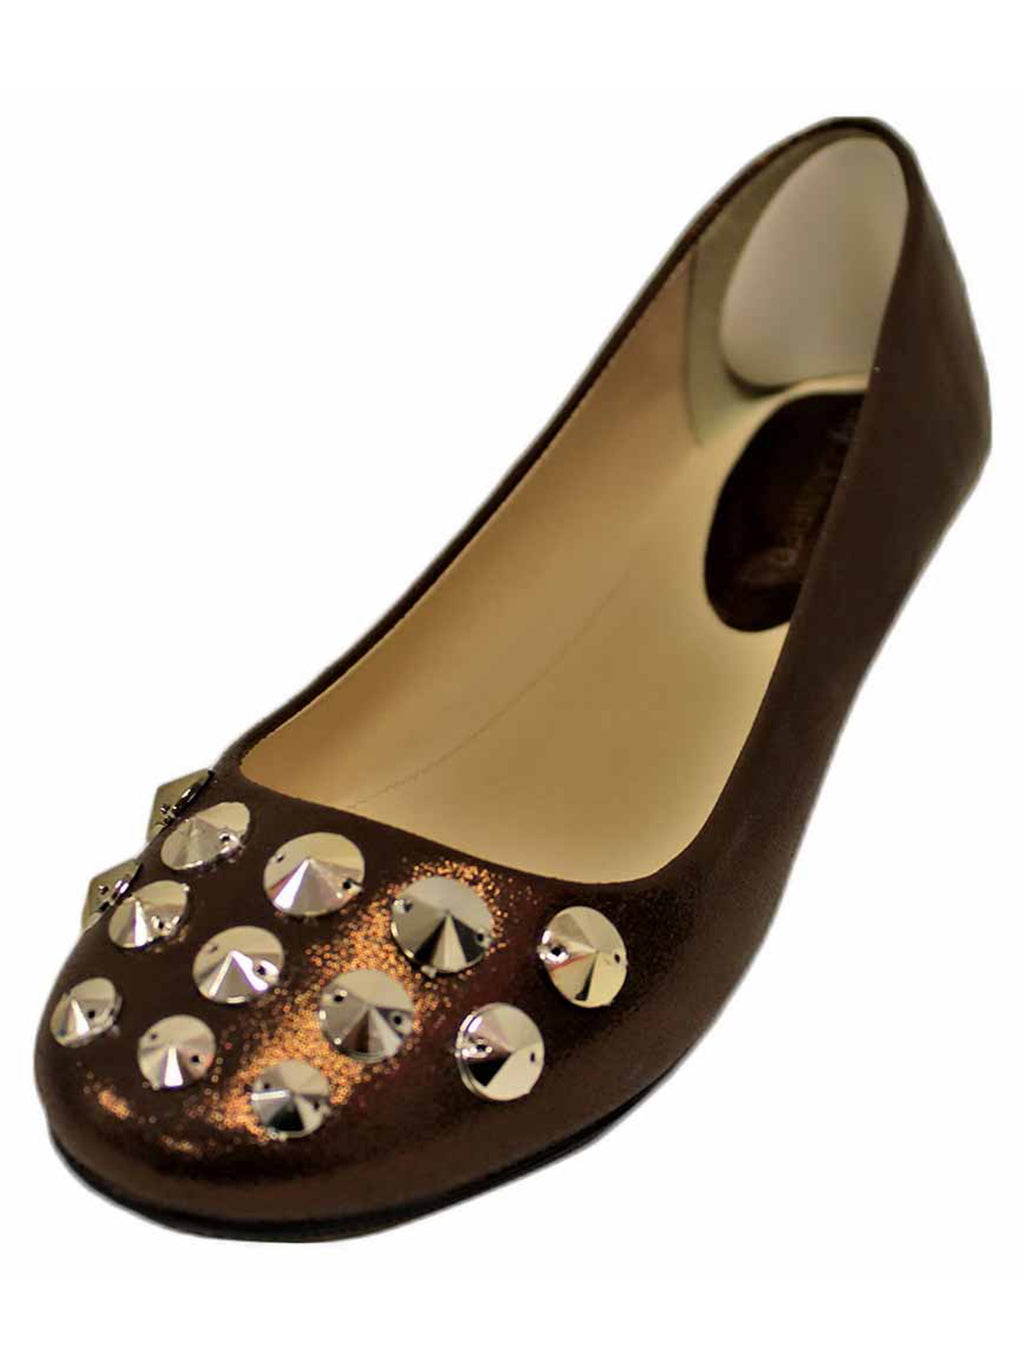 Suede Style Ballet Flats With Silver Studded Toe